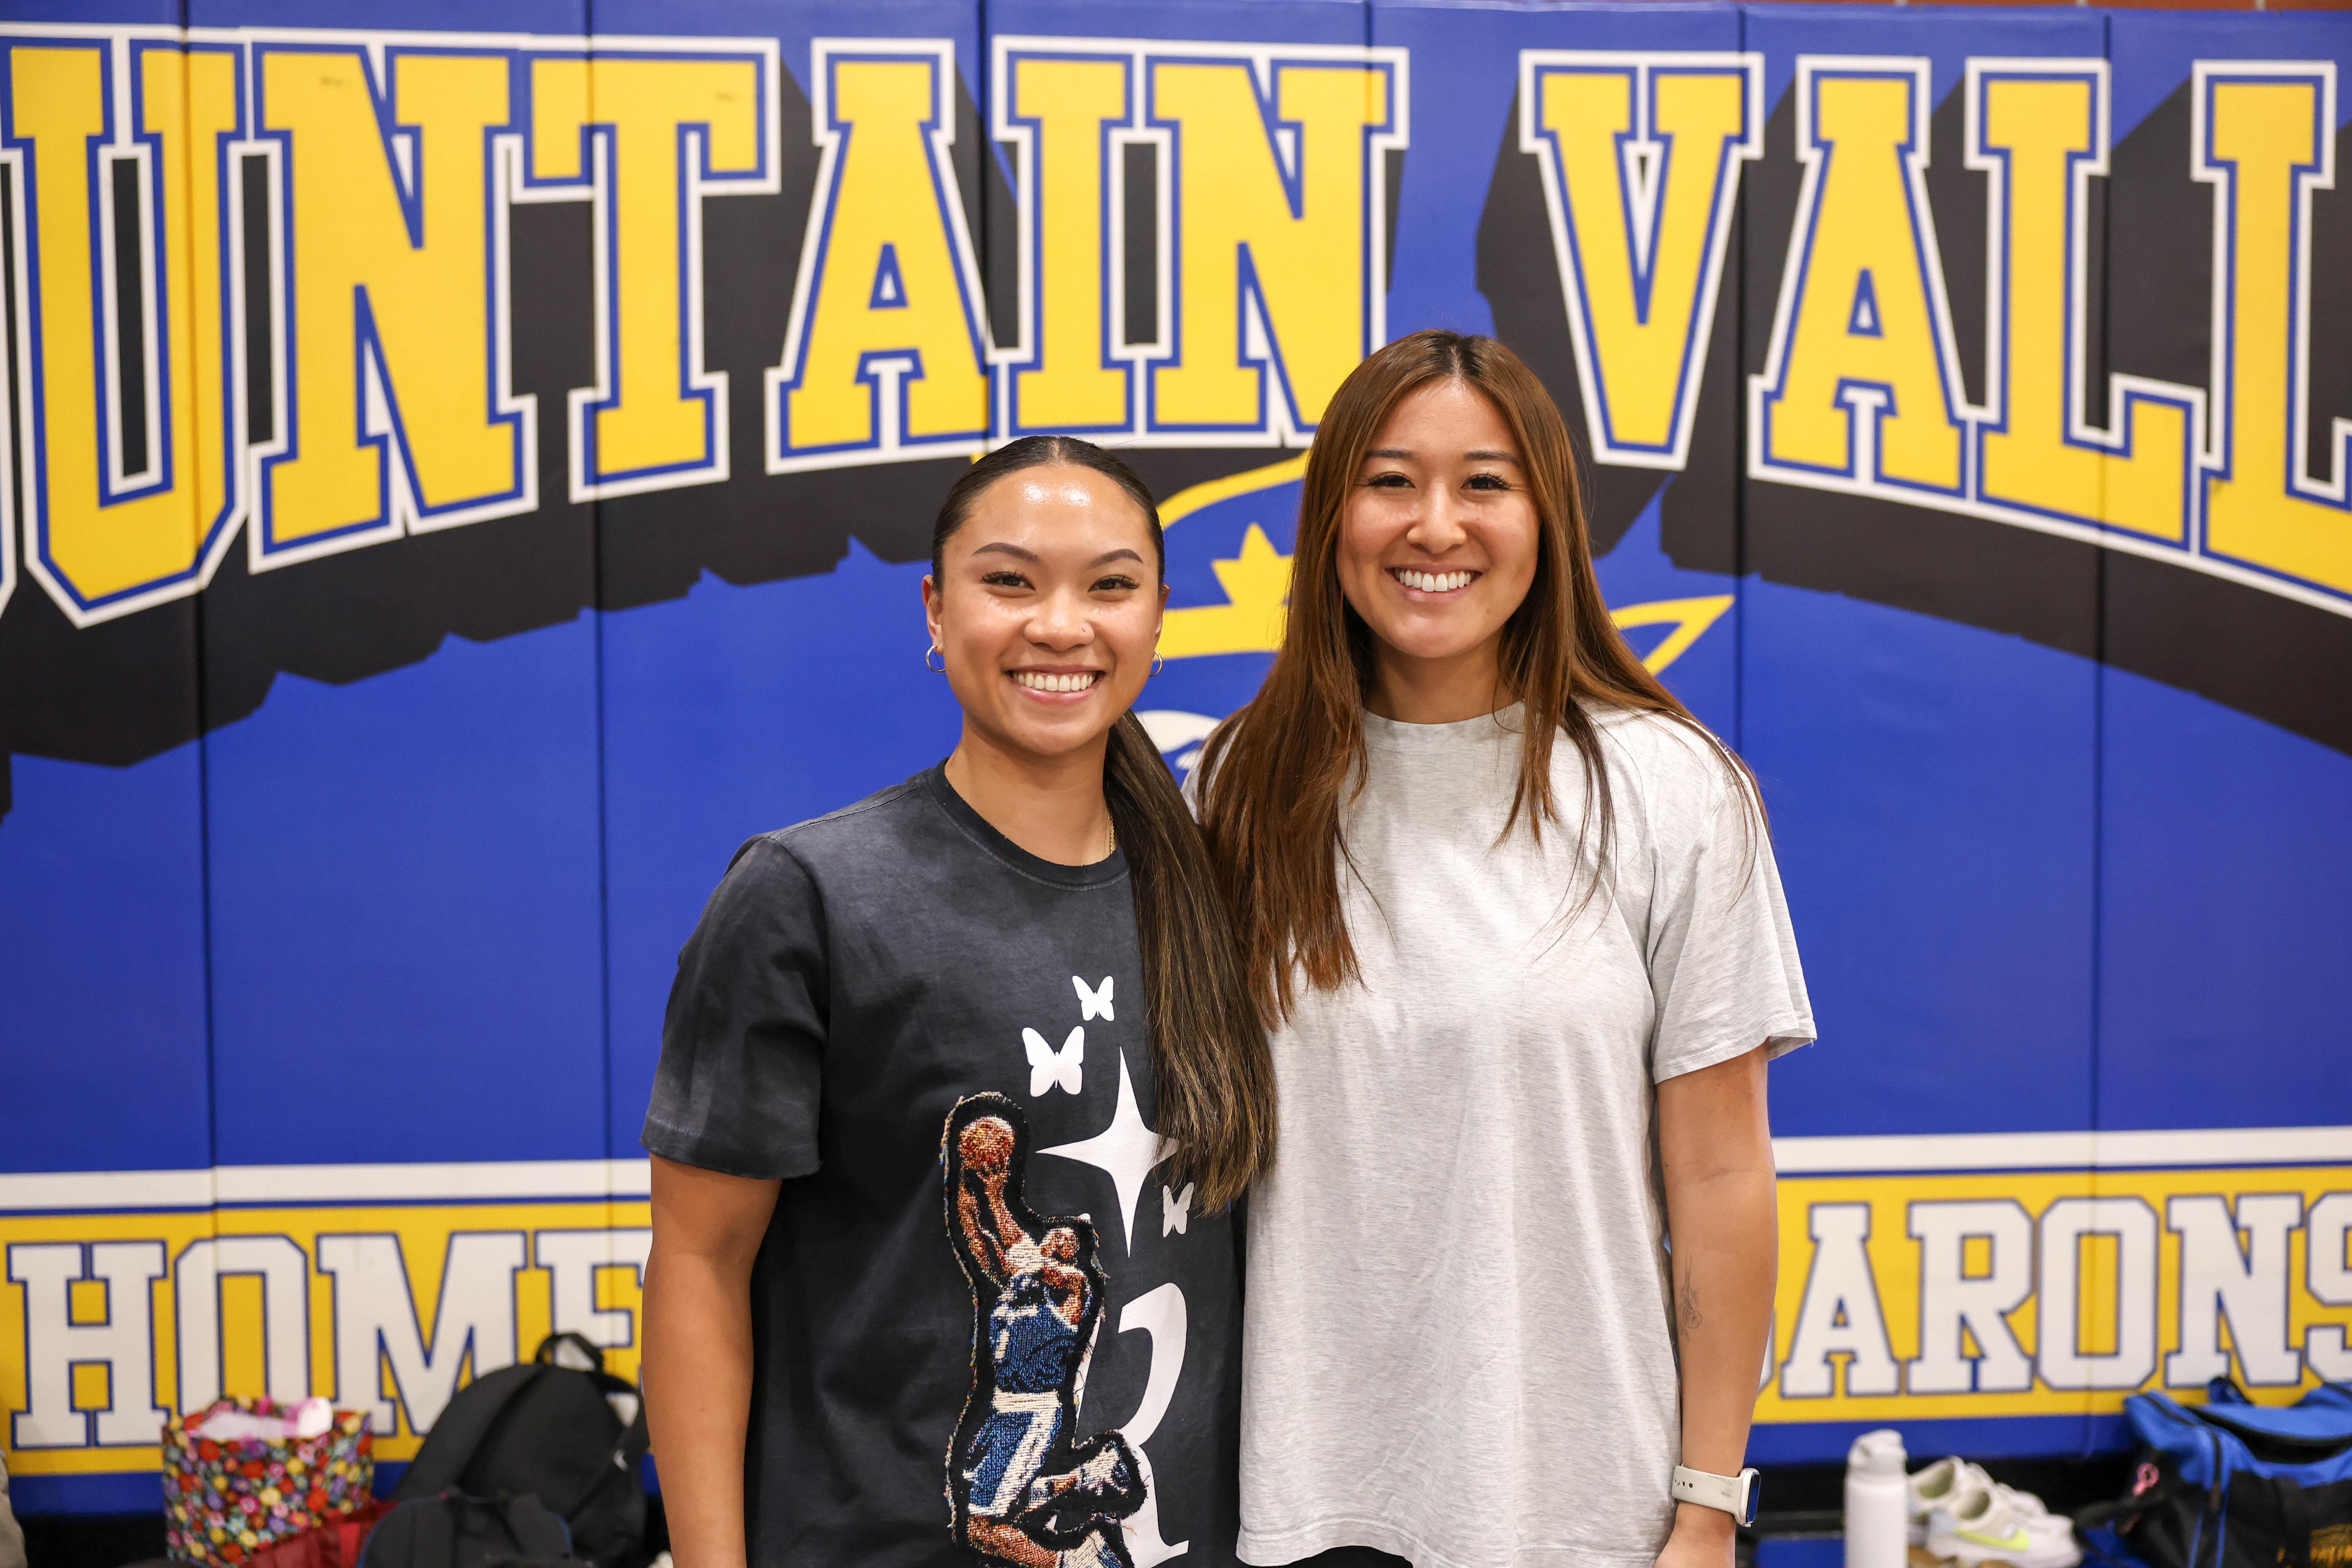 Izabella Om (left) and Camryn Hamaguchi (right) smile in front of FVHS sign